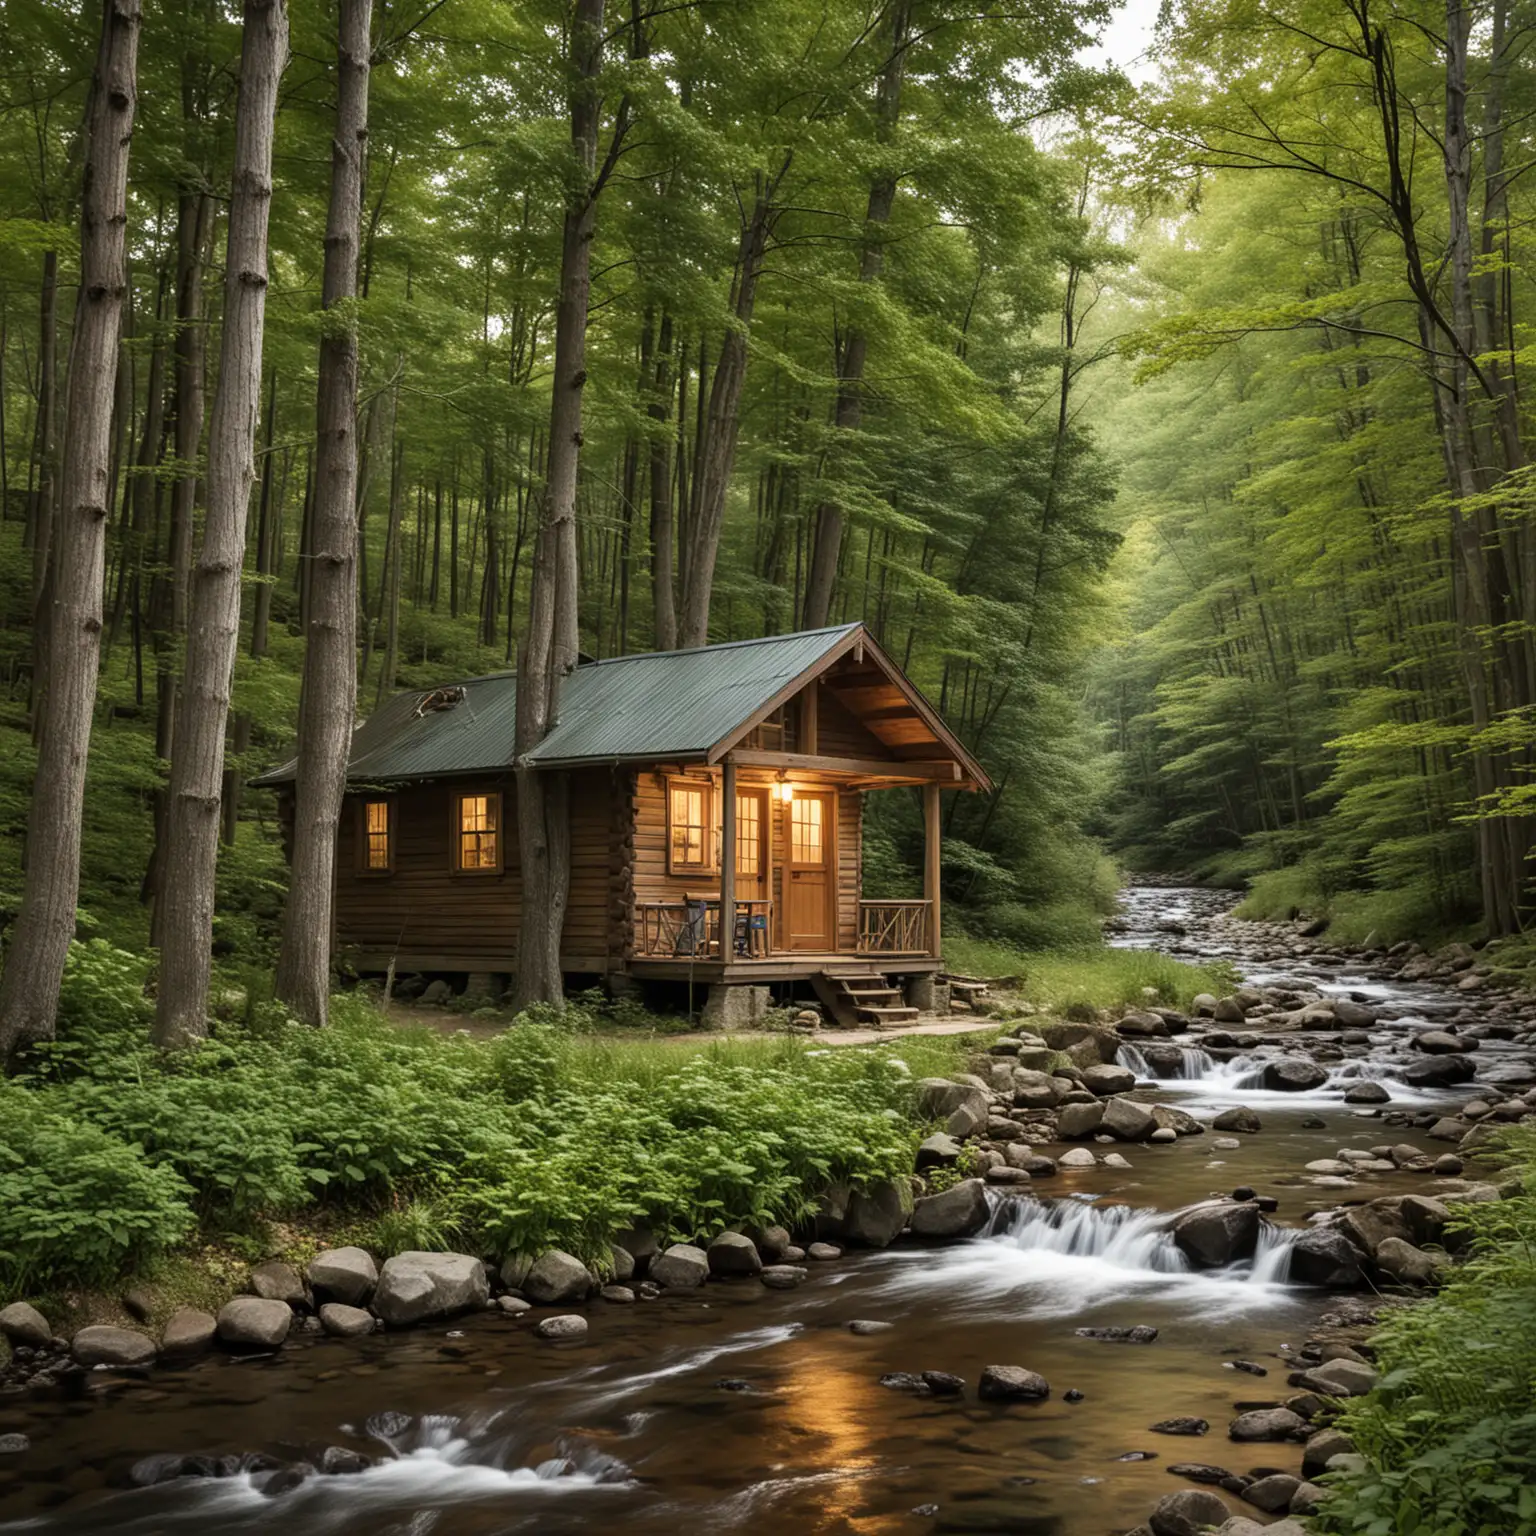 Small Cabin in a wooded area, next to a stream.